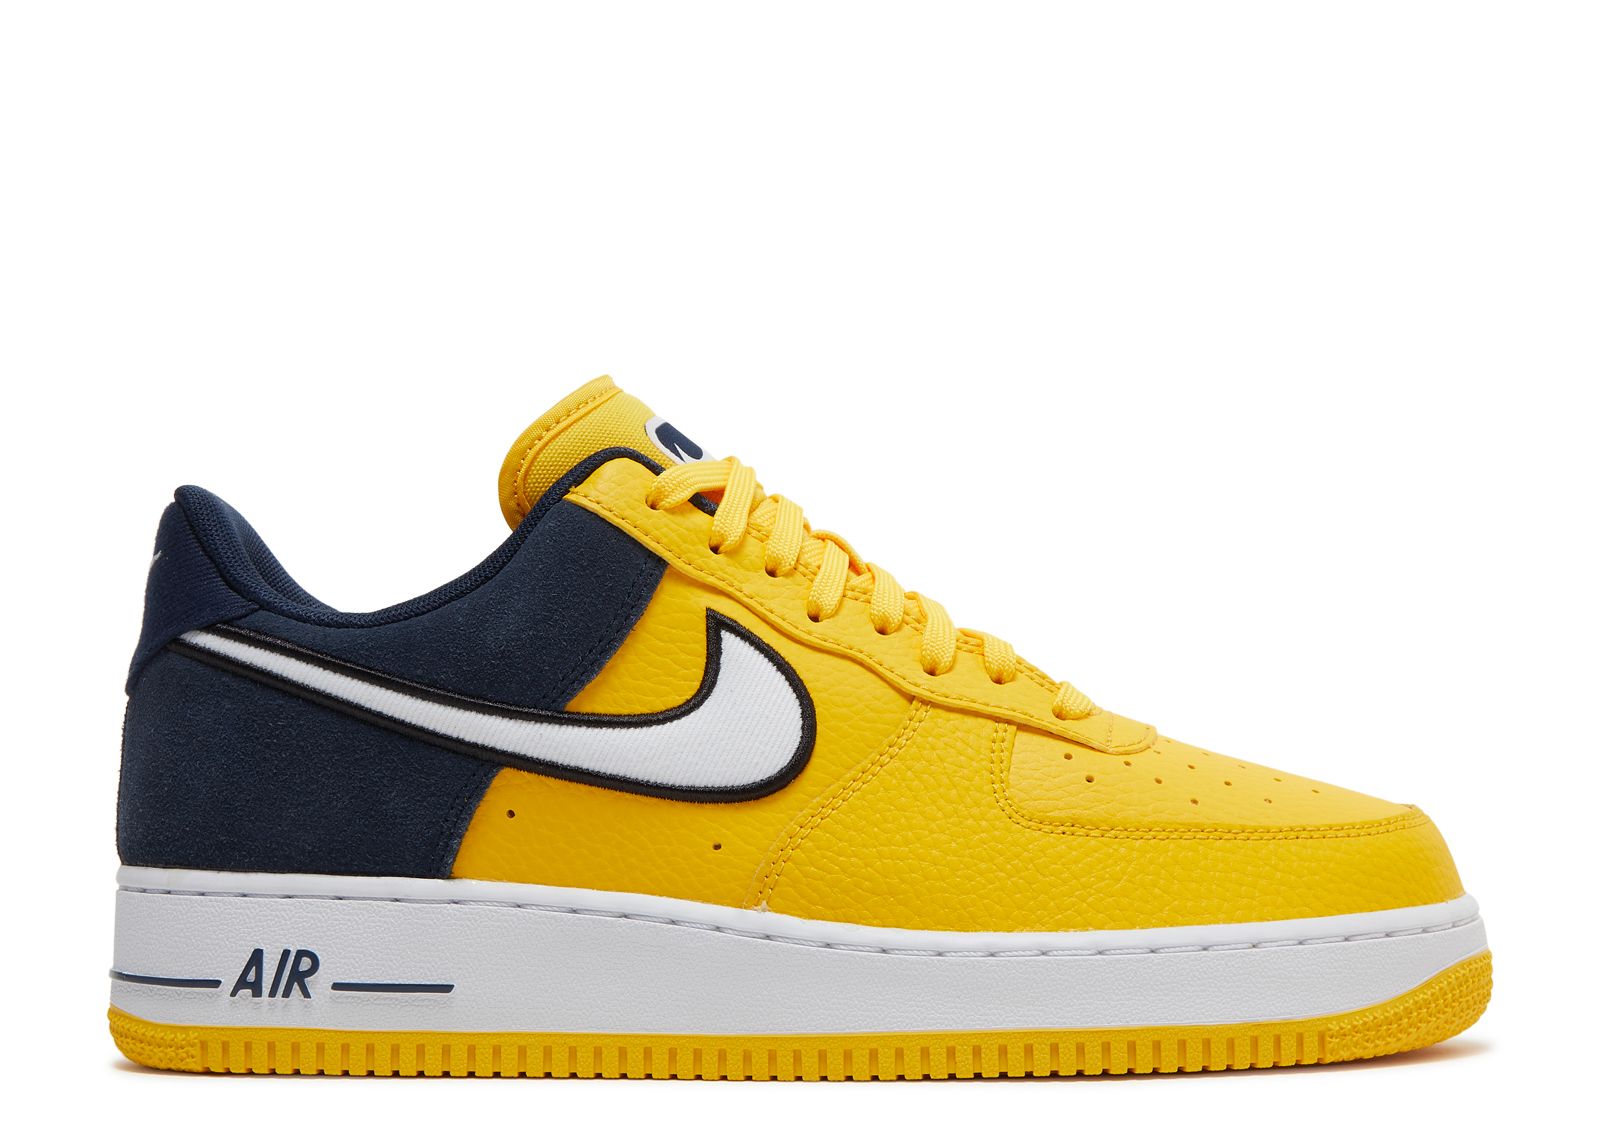 Air Force 1 Low '07 LV8 'Amarillo Obsidian' - Nike - AO2439 700 ...